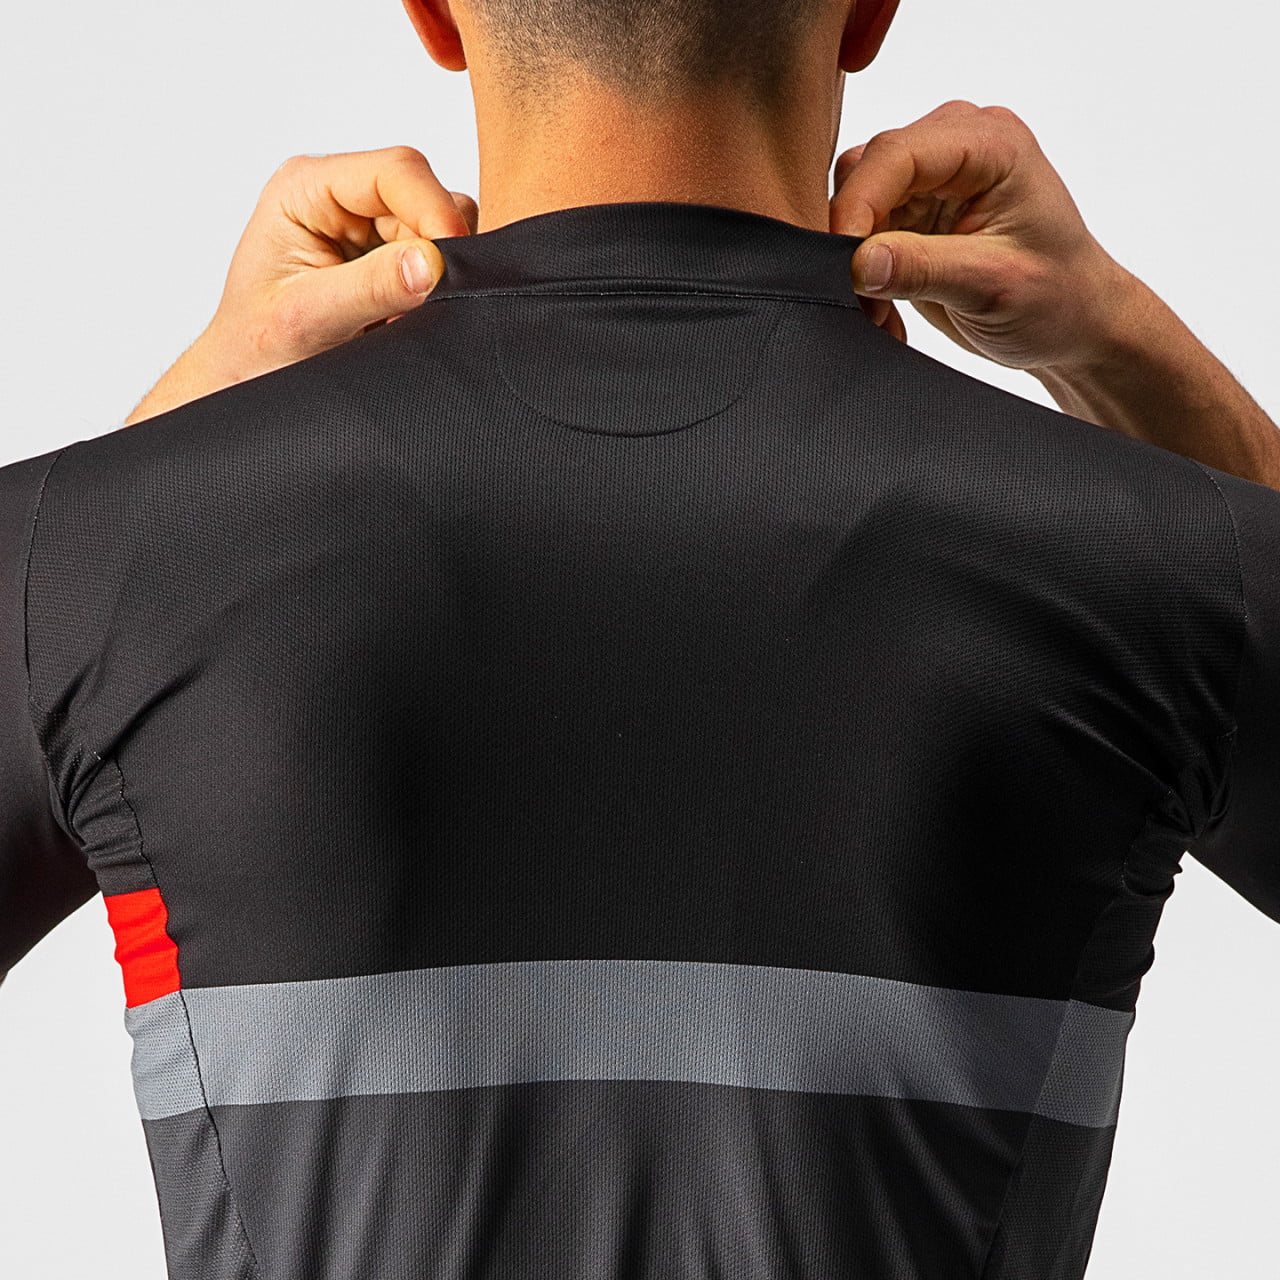 A Blocco Short Sleeve Jersey